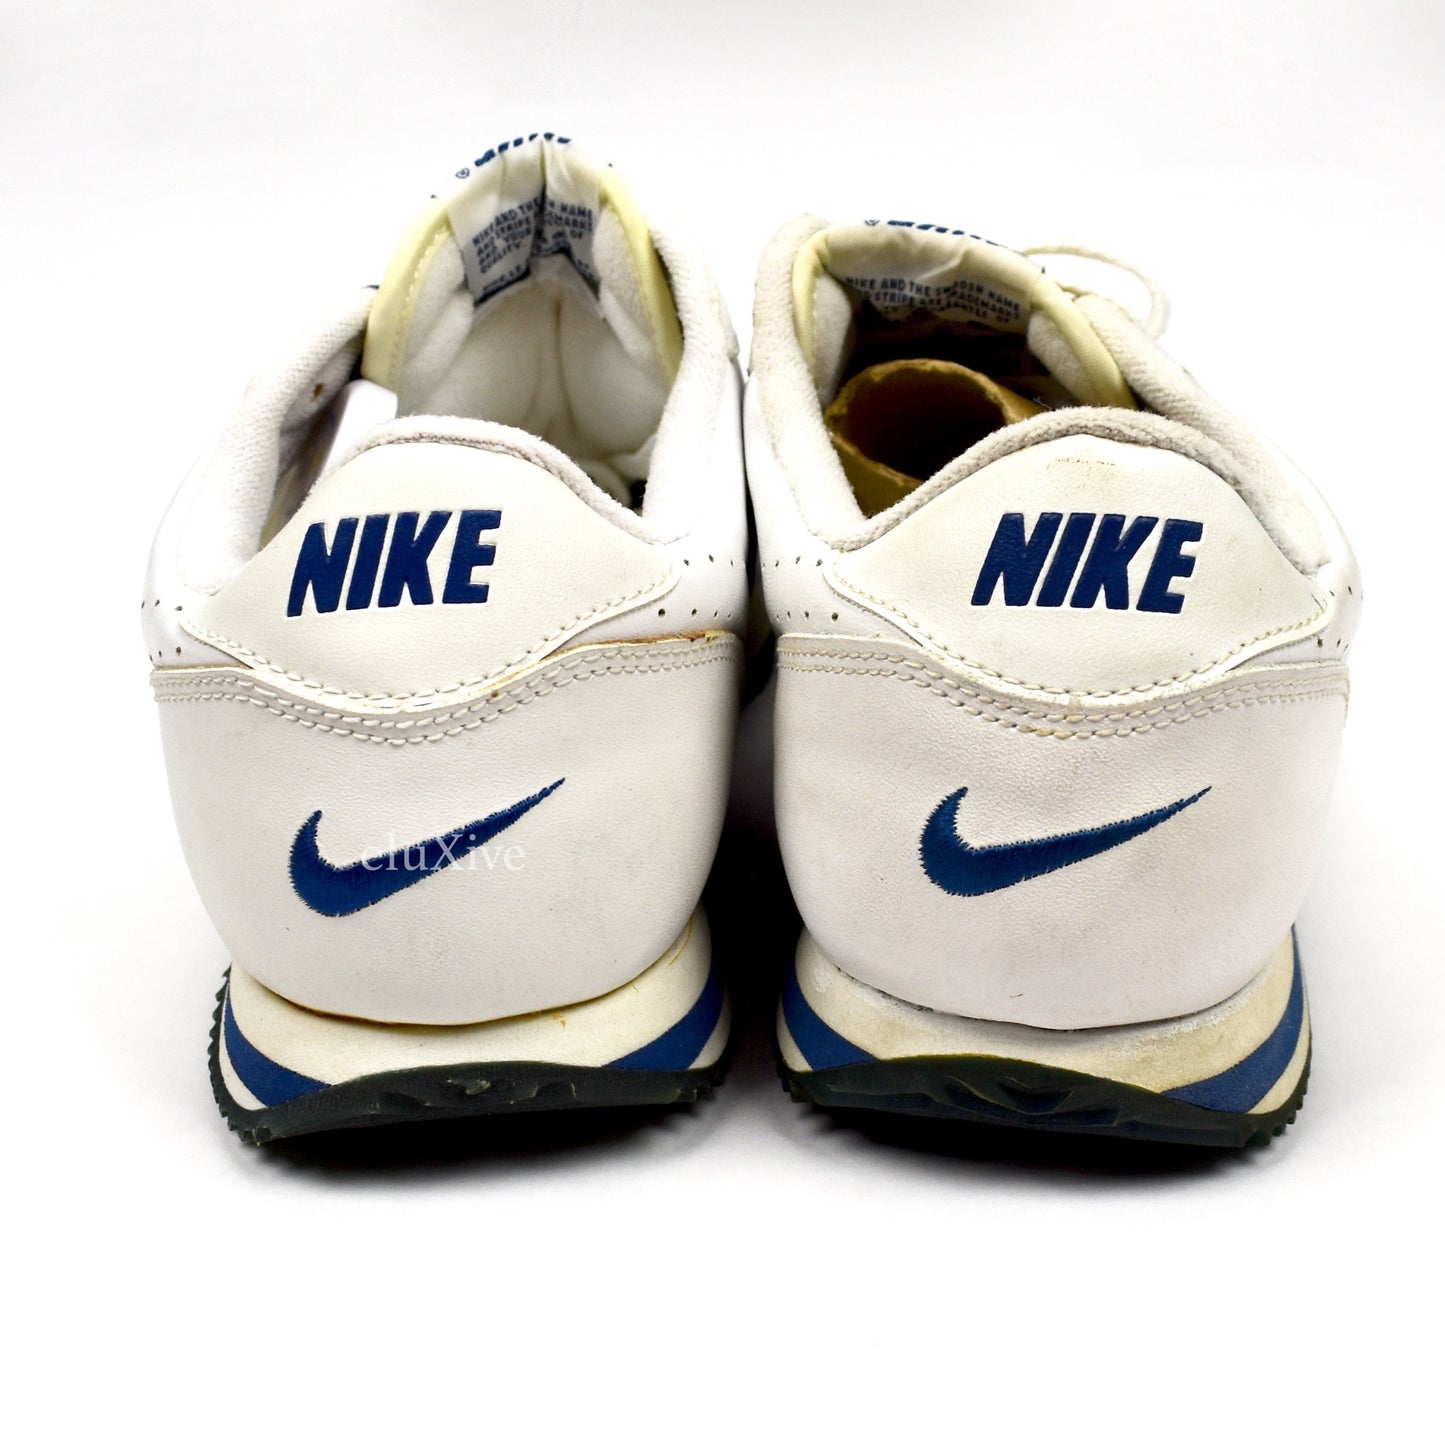 Nike - 1997 Cortez X CL SC Perforated (White/French Blue)